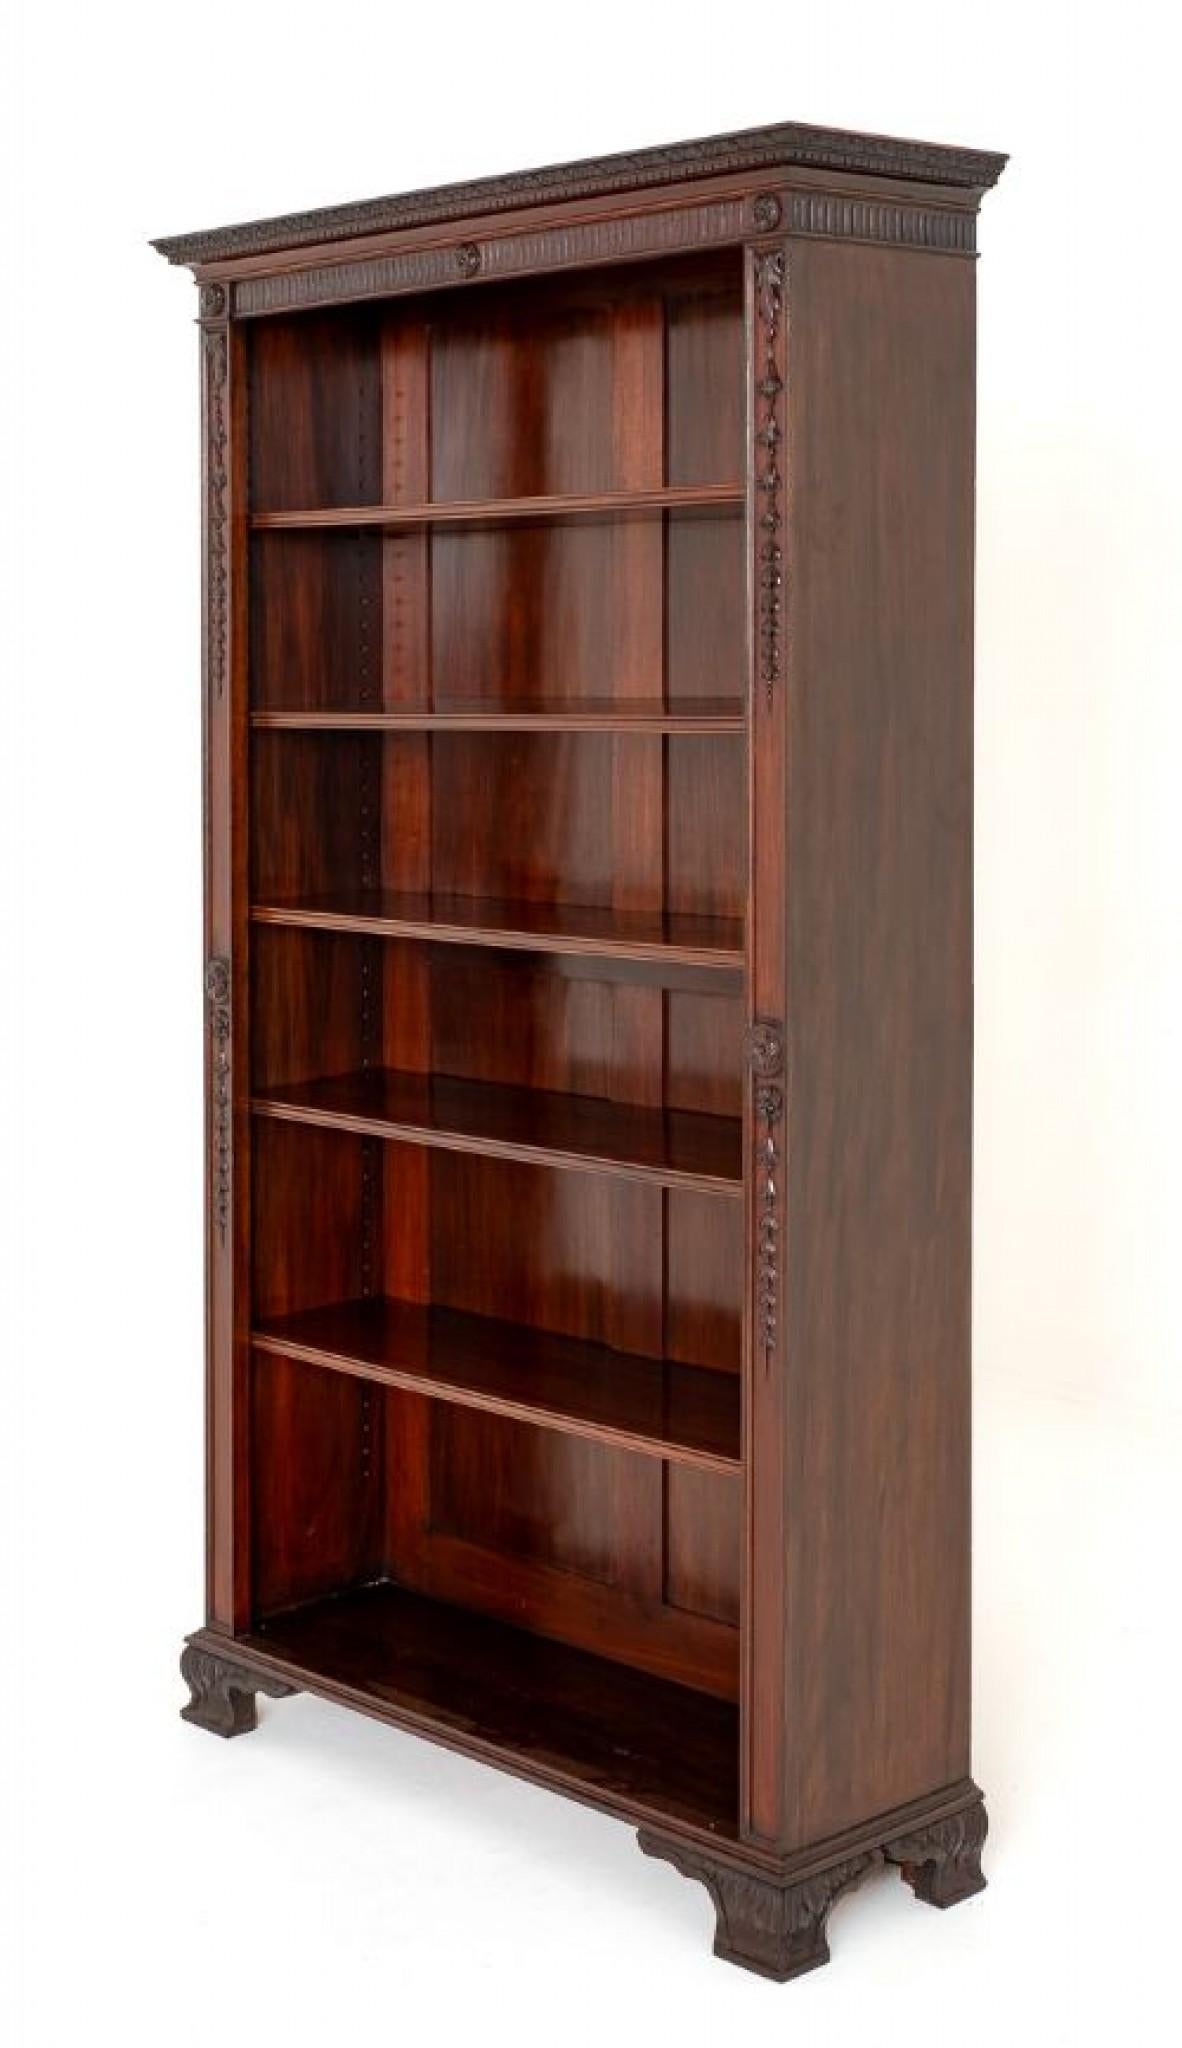 Impressive Mahogany Carved Open Bookcase.
This Bookcase is of a Chippendale Manner.
Circa 1880
Standing upon Carved 